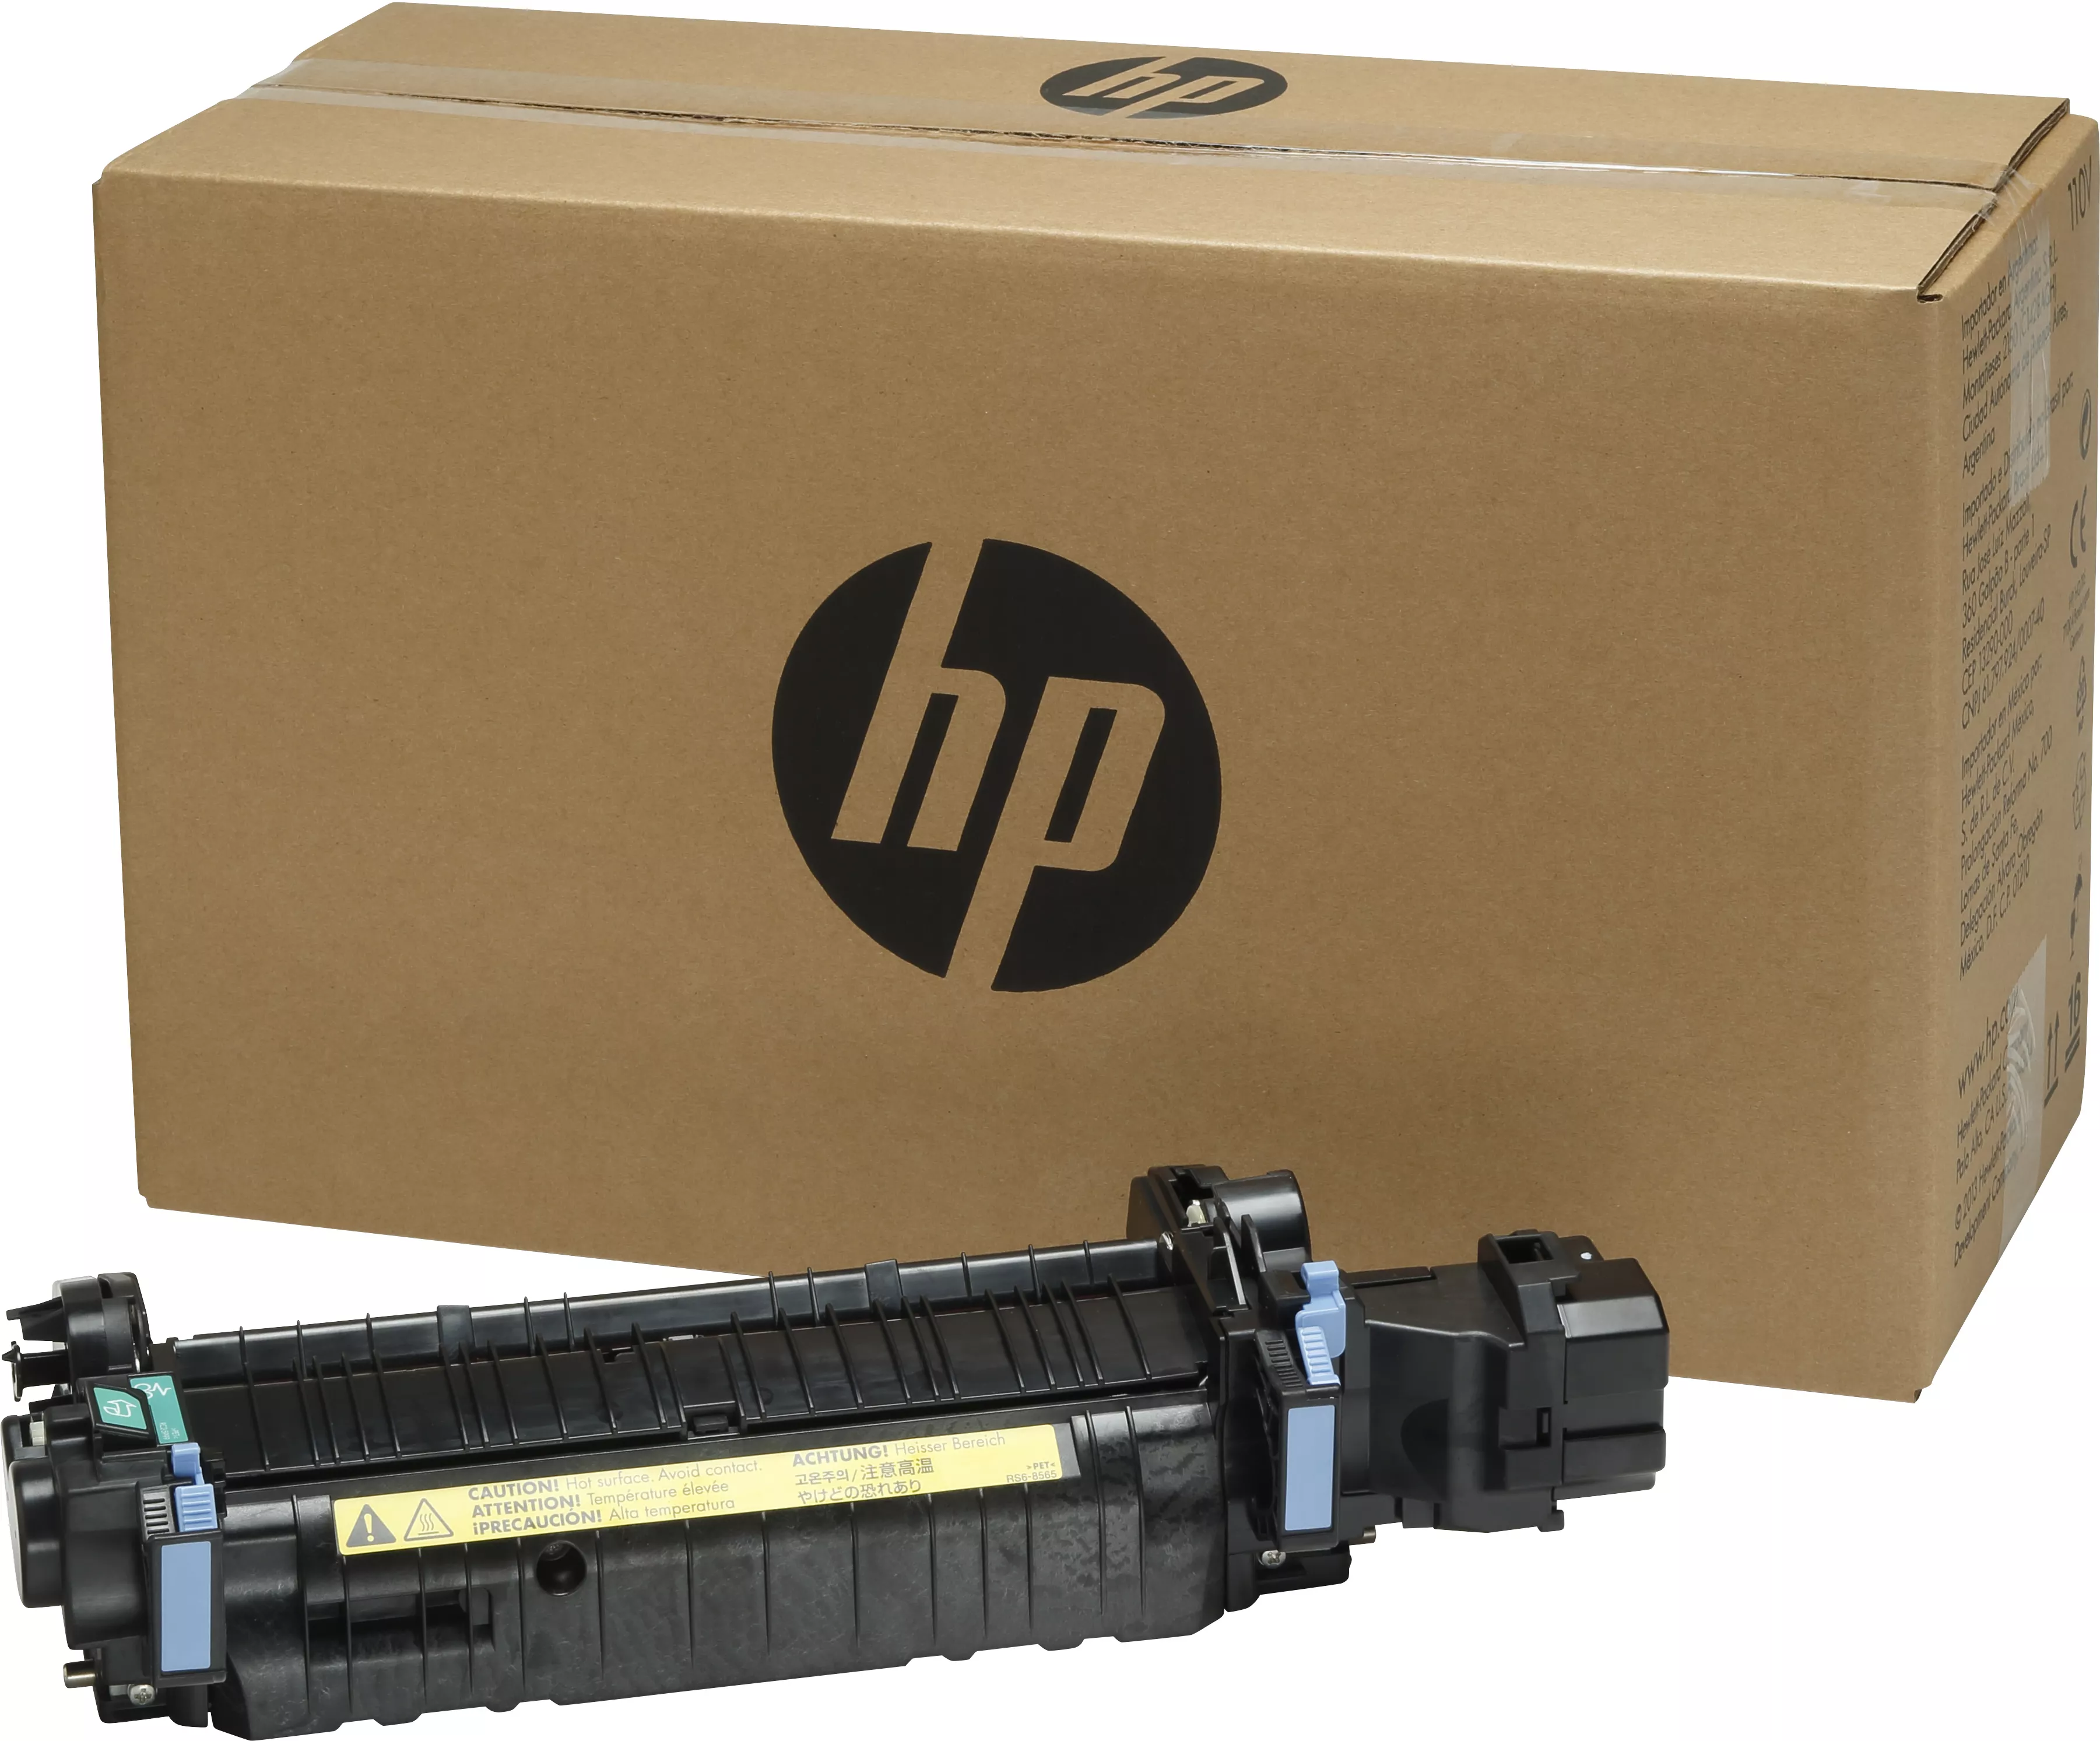 Achat HP original fuser Kit CE274A standard capacity 150.000 pages - 0884420403661